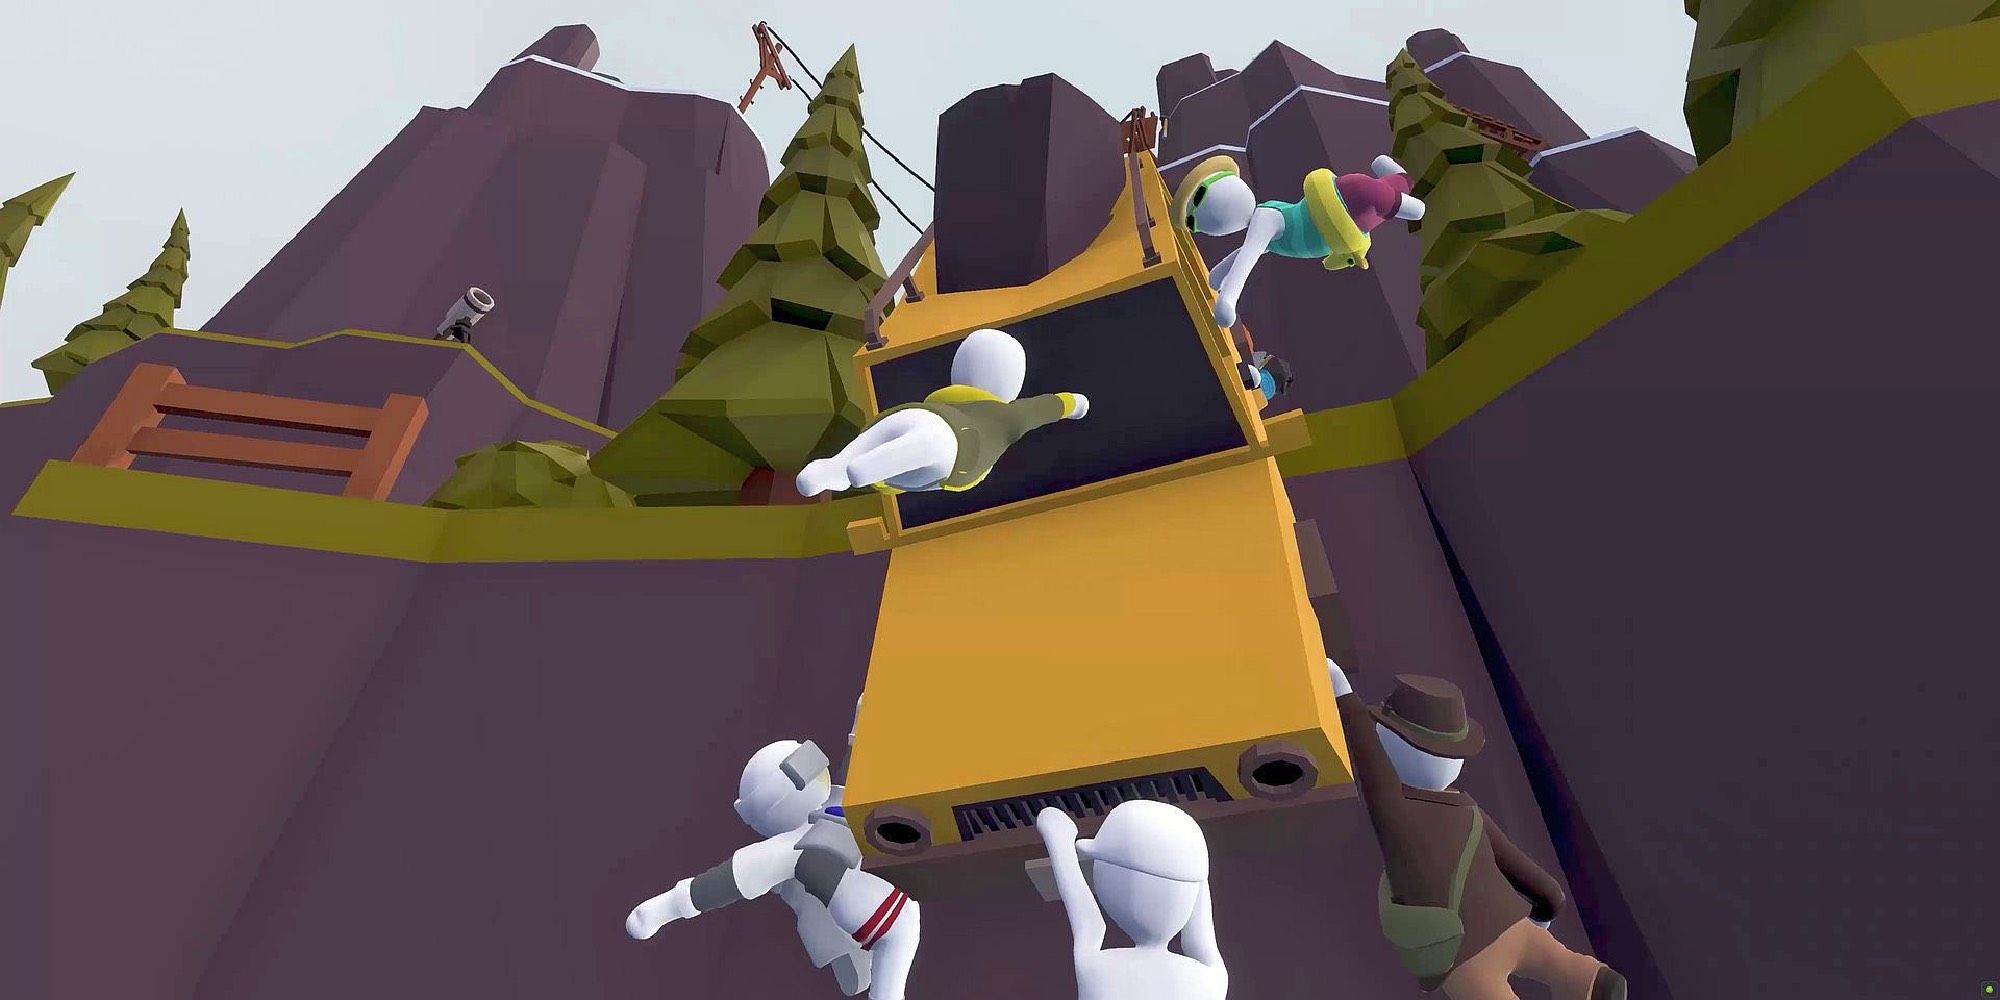 A group of plain doll-like characters hanging off of a car on a cliff's edge